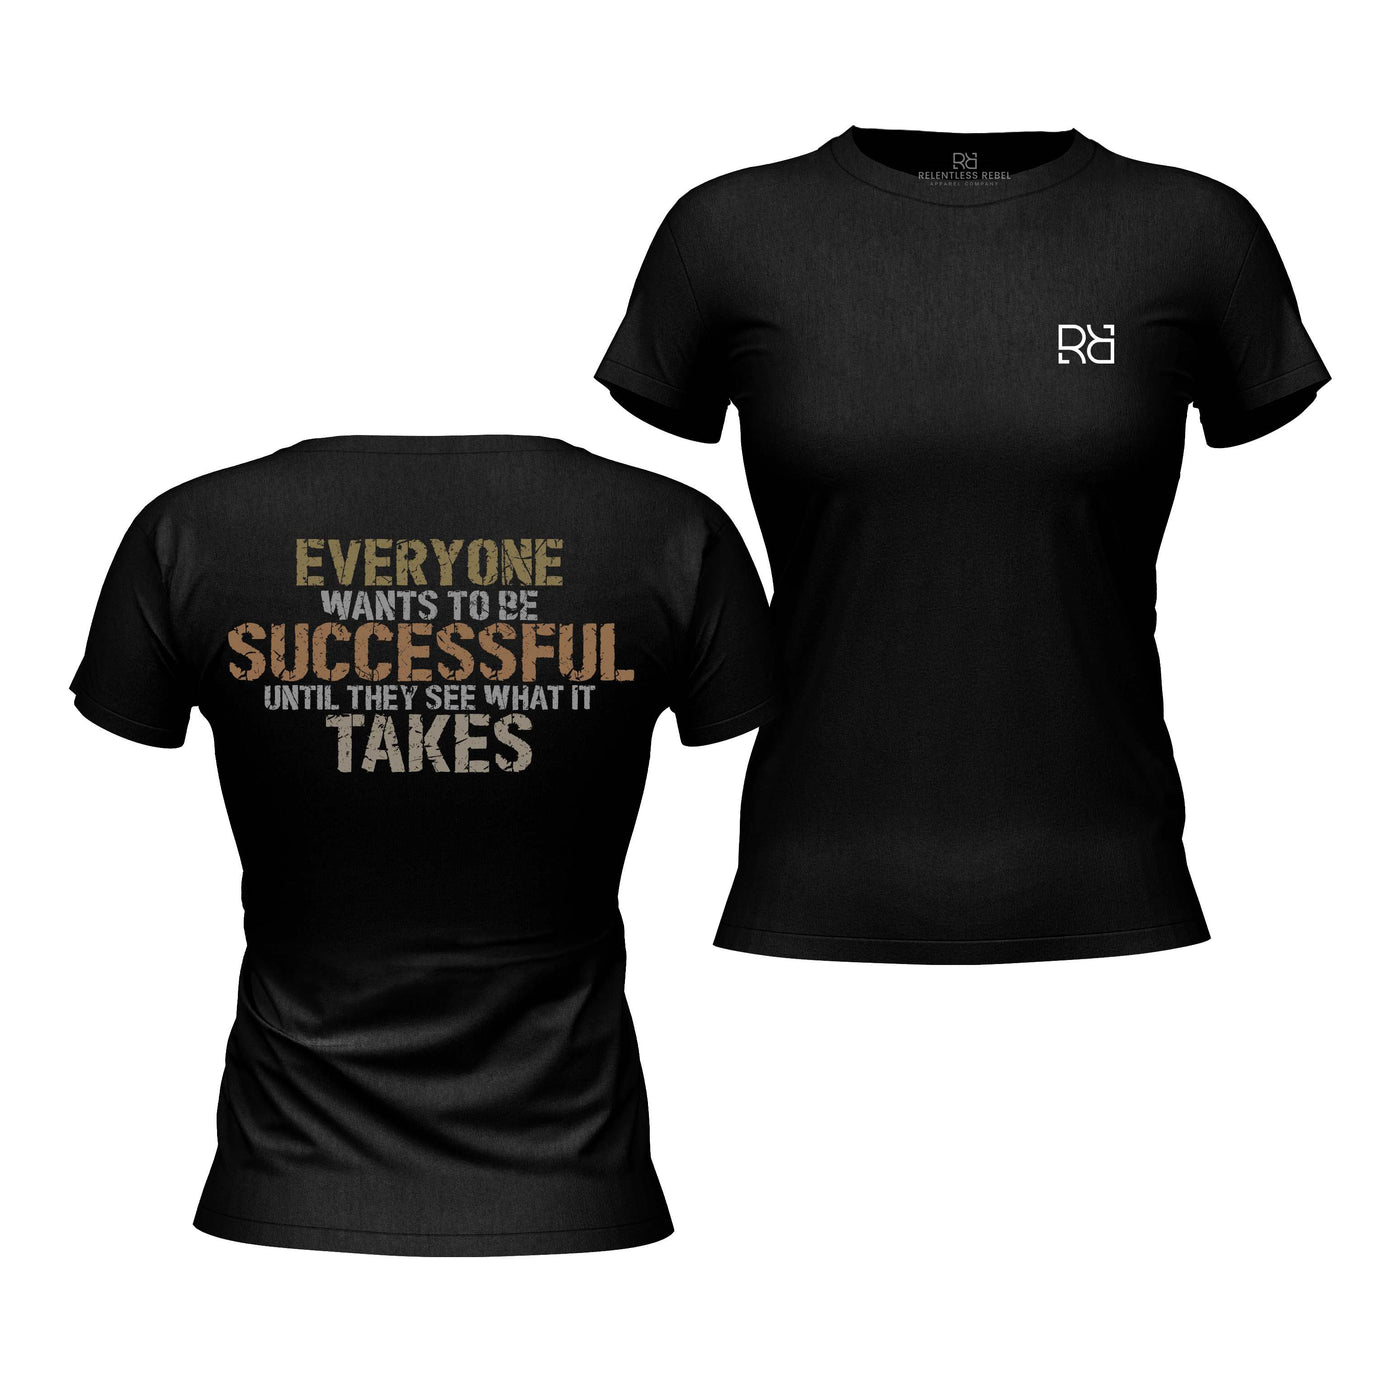 Solid Black Women's Everyone Wants to Be Successful Back Design Tee